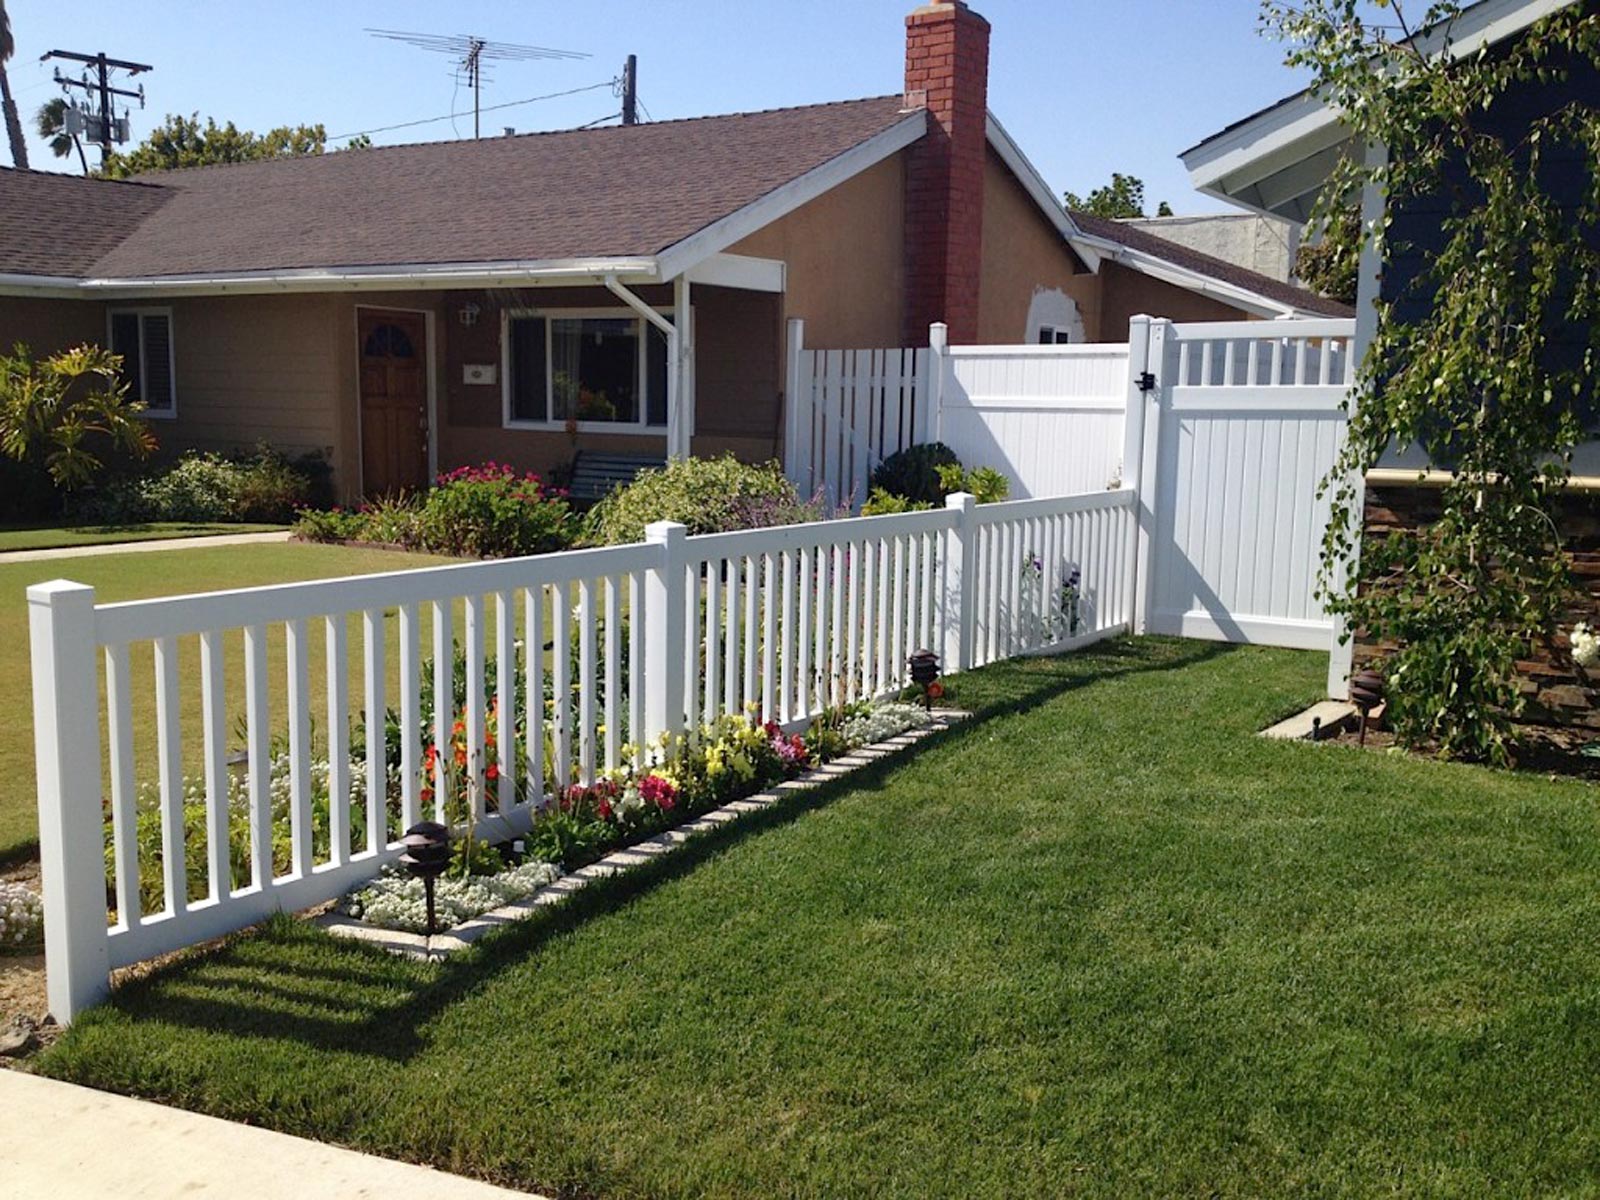 Plastic Fence vs. Wood Fence - The Pros & Cons